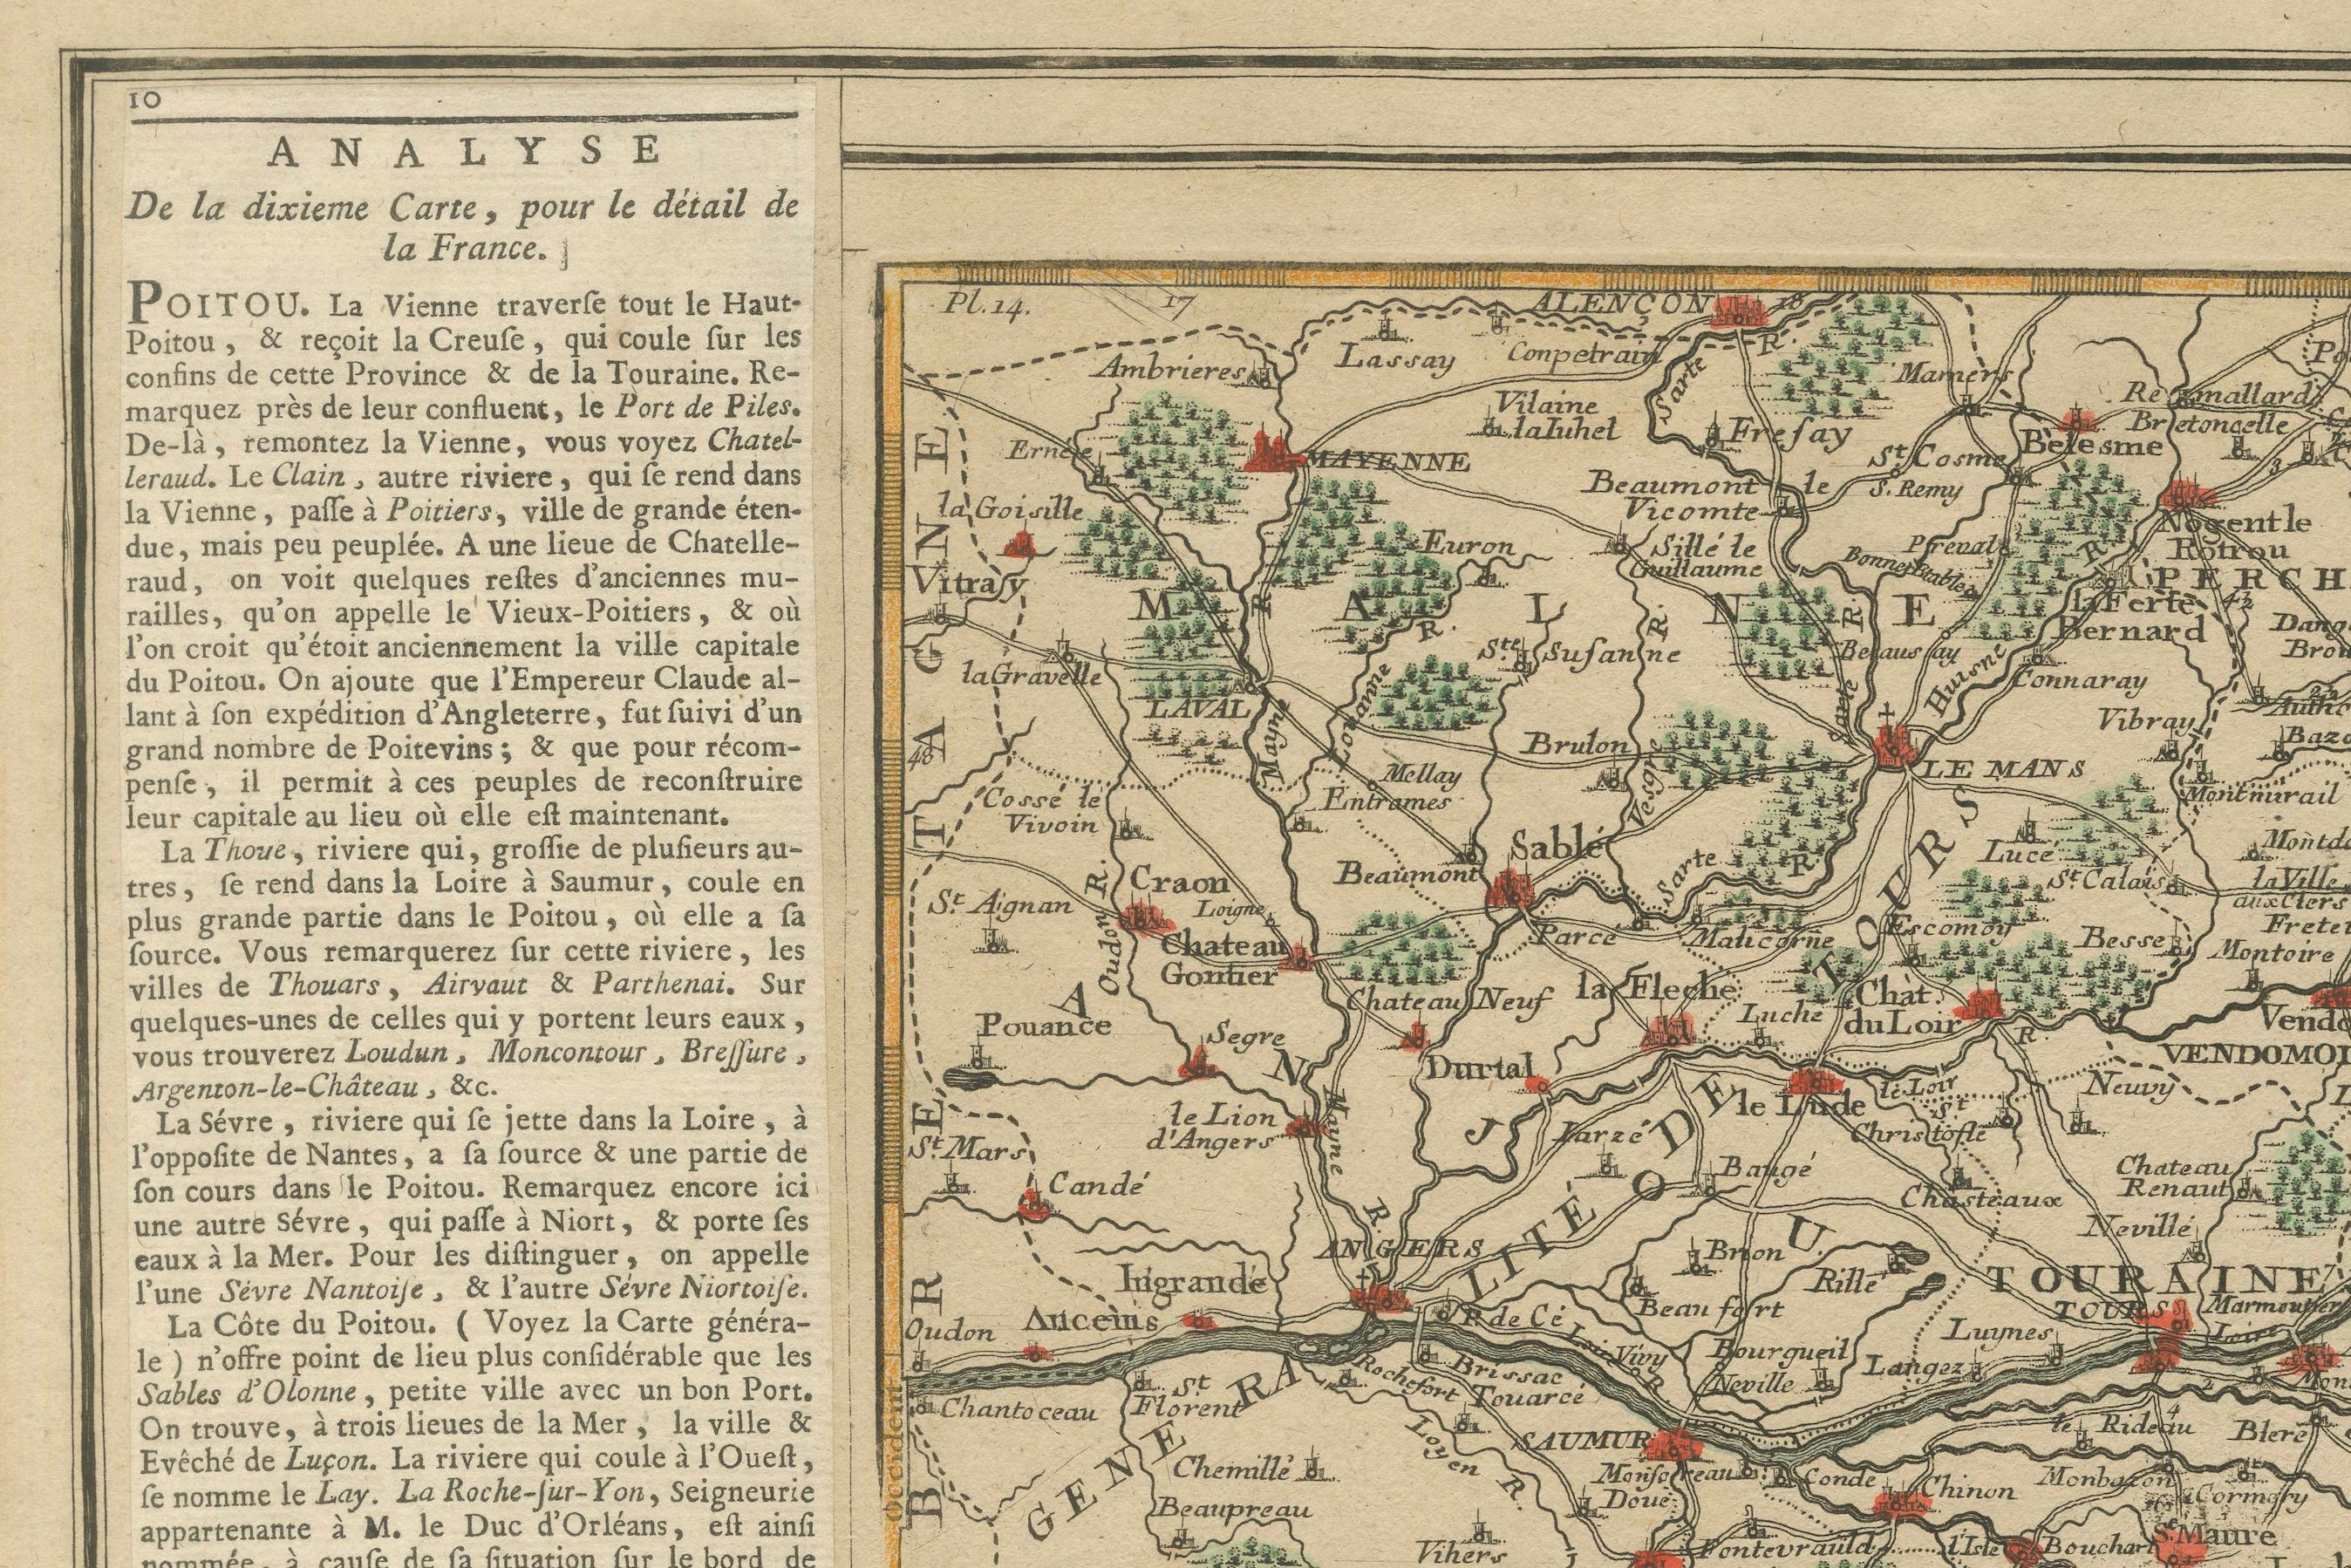 The map with text neatly mounted on both sides of the map on the plate, is a section of an old map with accompanying French text. The map mentions several historical French provinces such as Poitou, Berry, Bourbonnais, and Nivernais, which are all